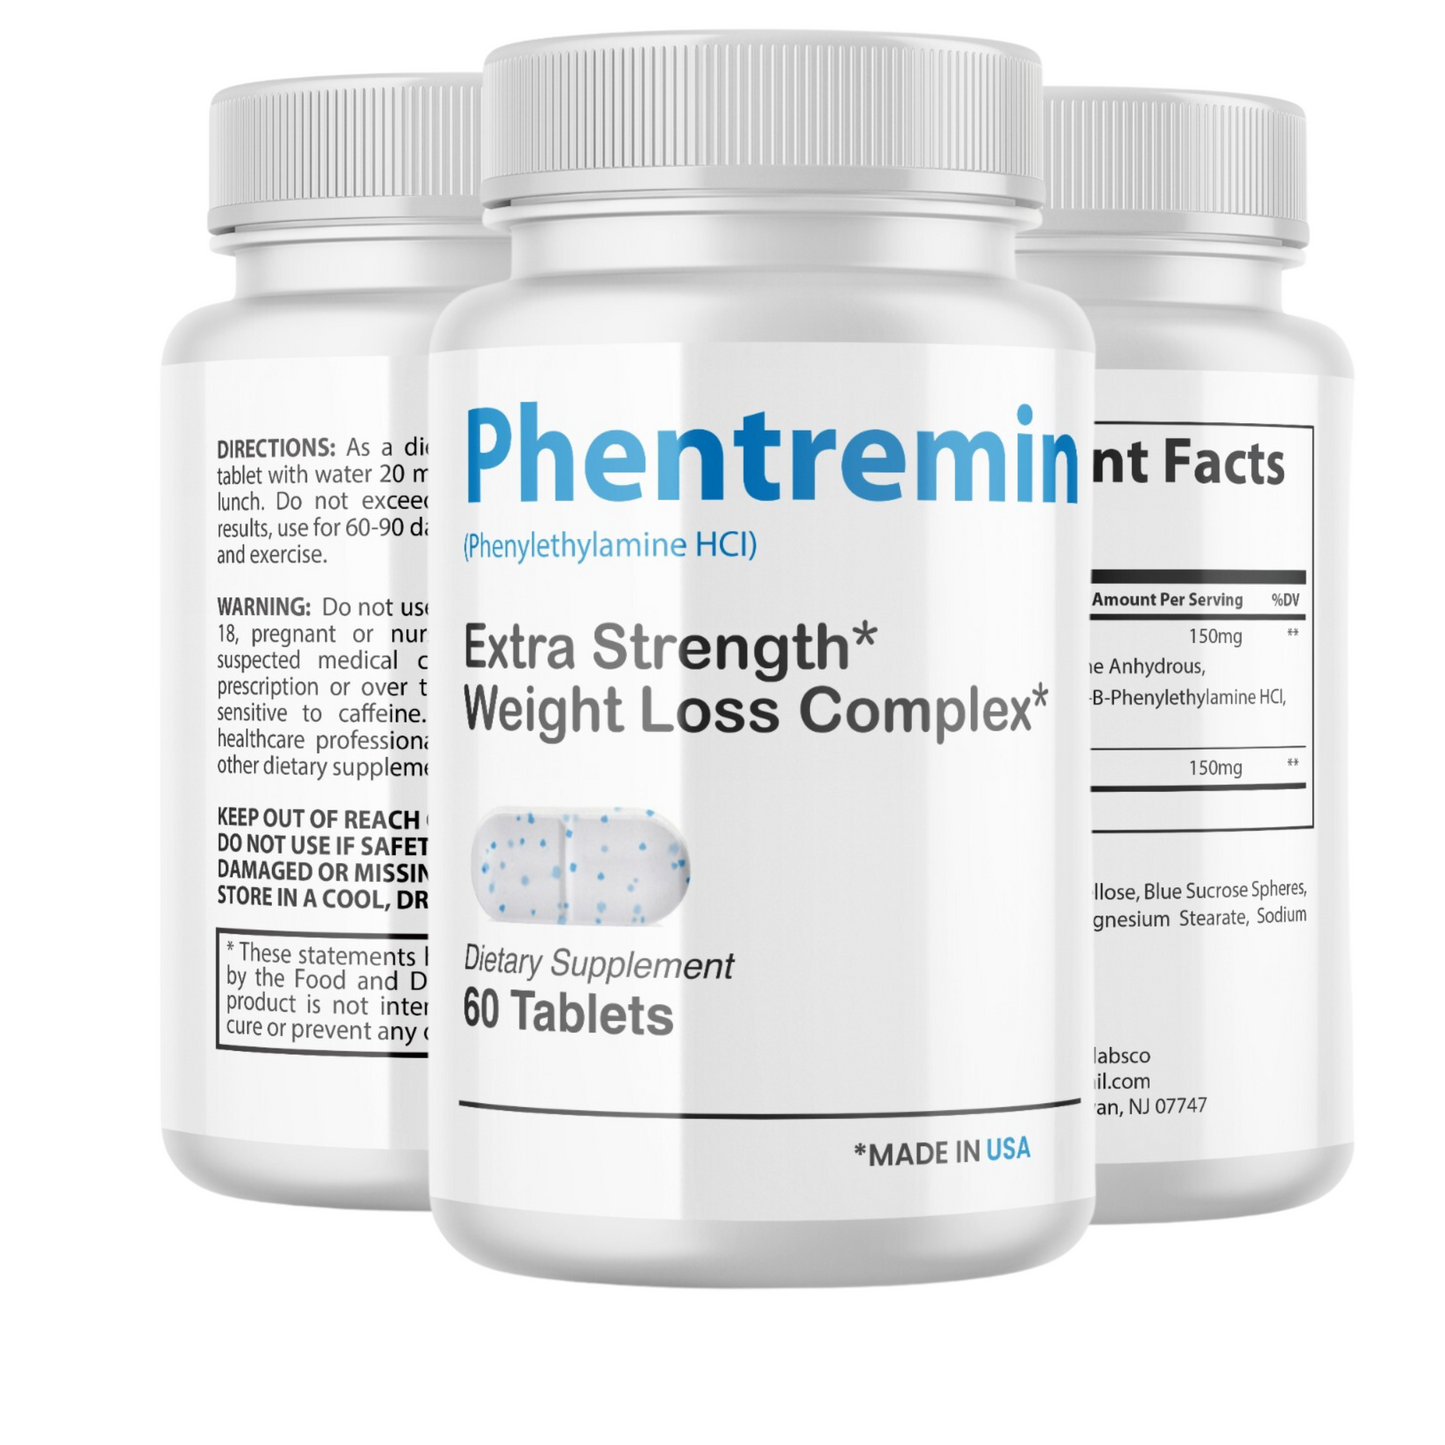 Phentremin - 2 MONTH SUPPLY - Best Official Fat Burner - Professional Grade Ingredients